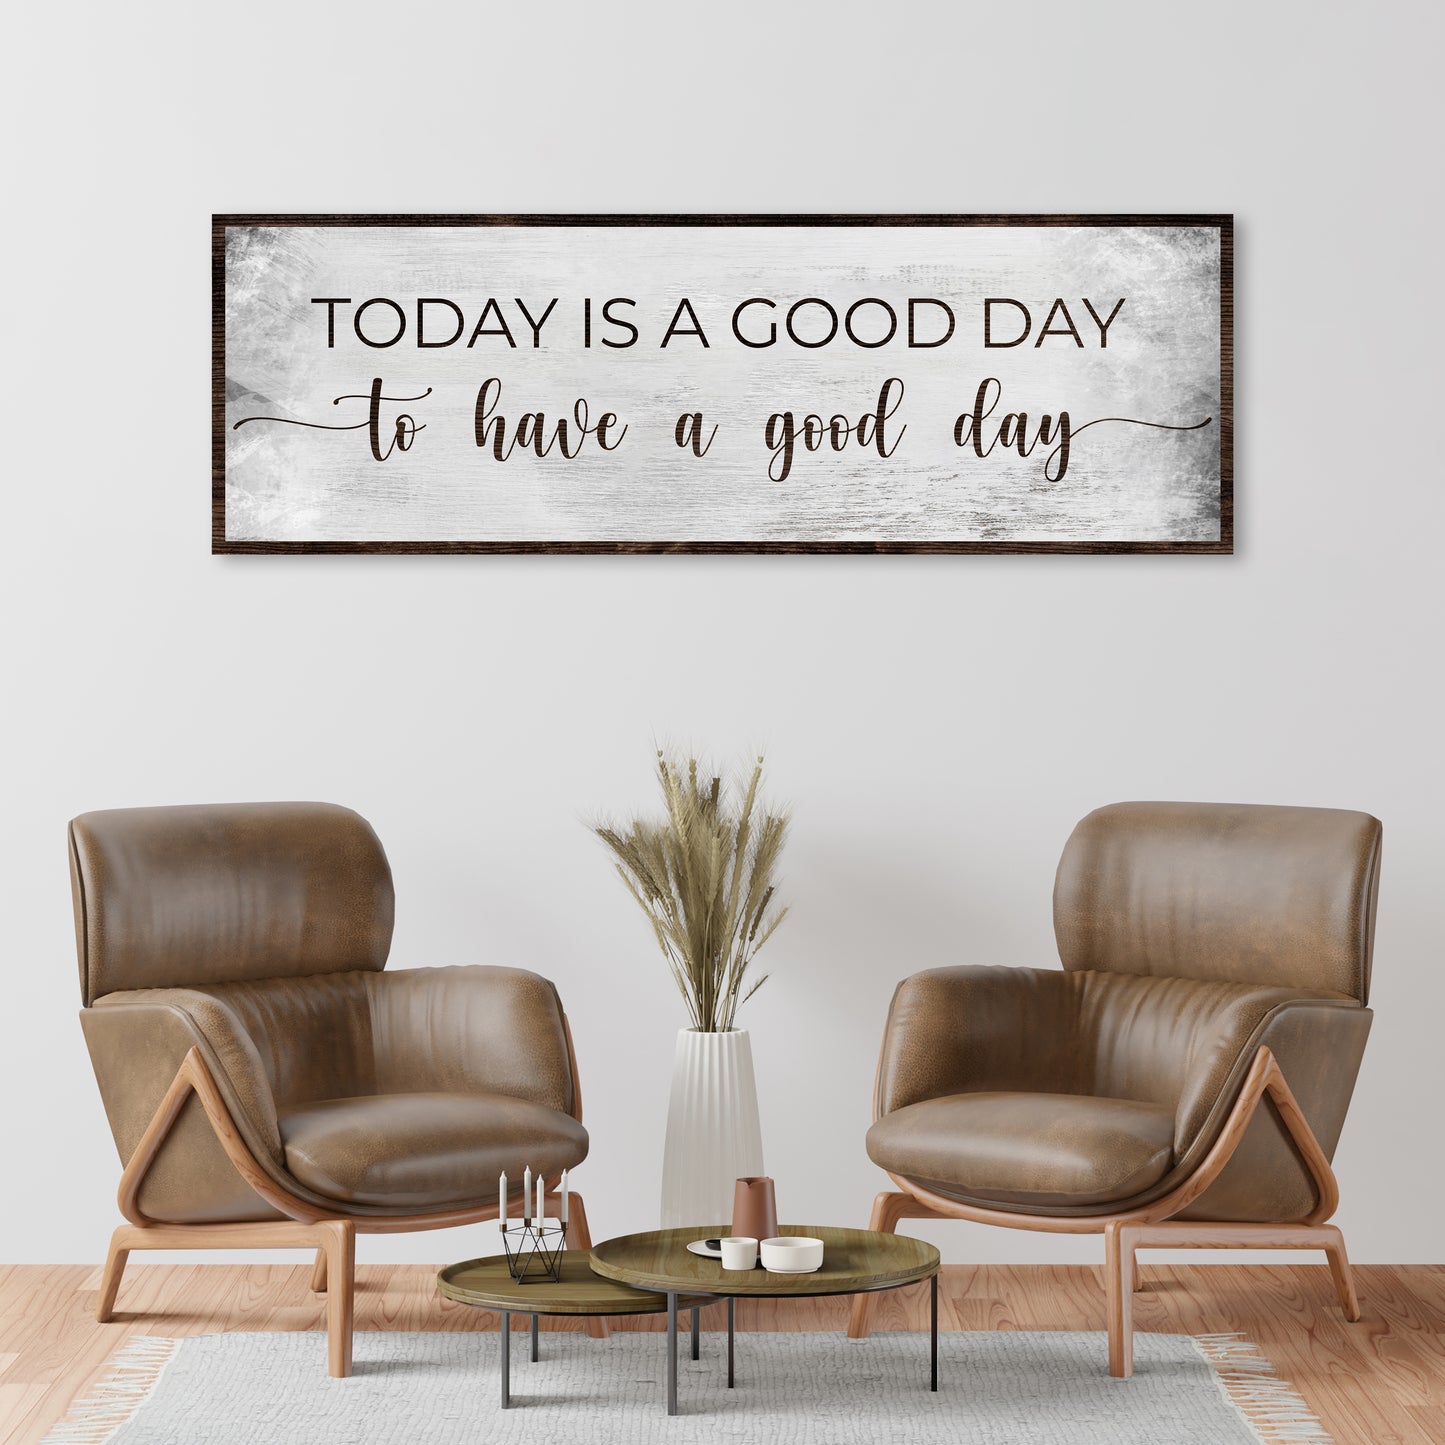 Today is a Good Day to Have a Good Day Sign - Image by Tailored Canvases